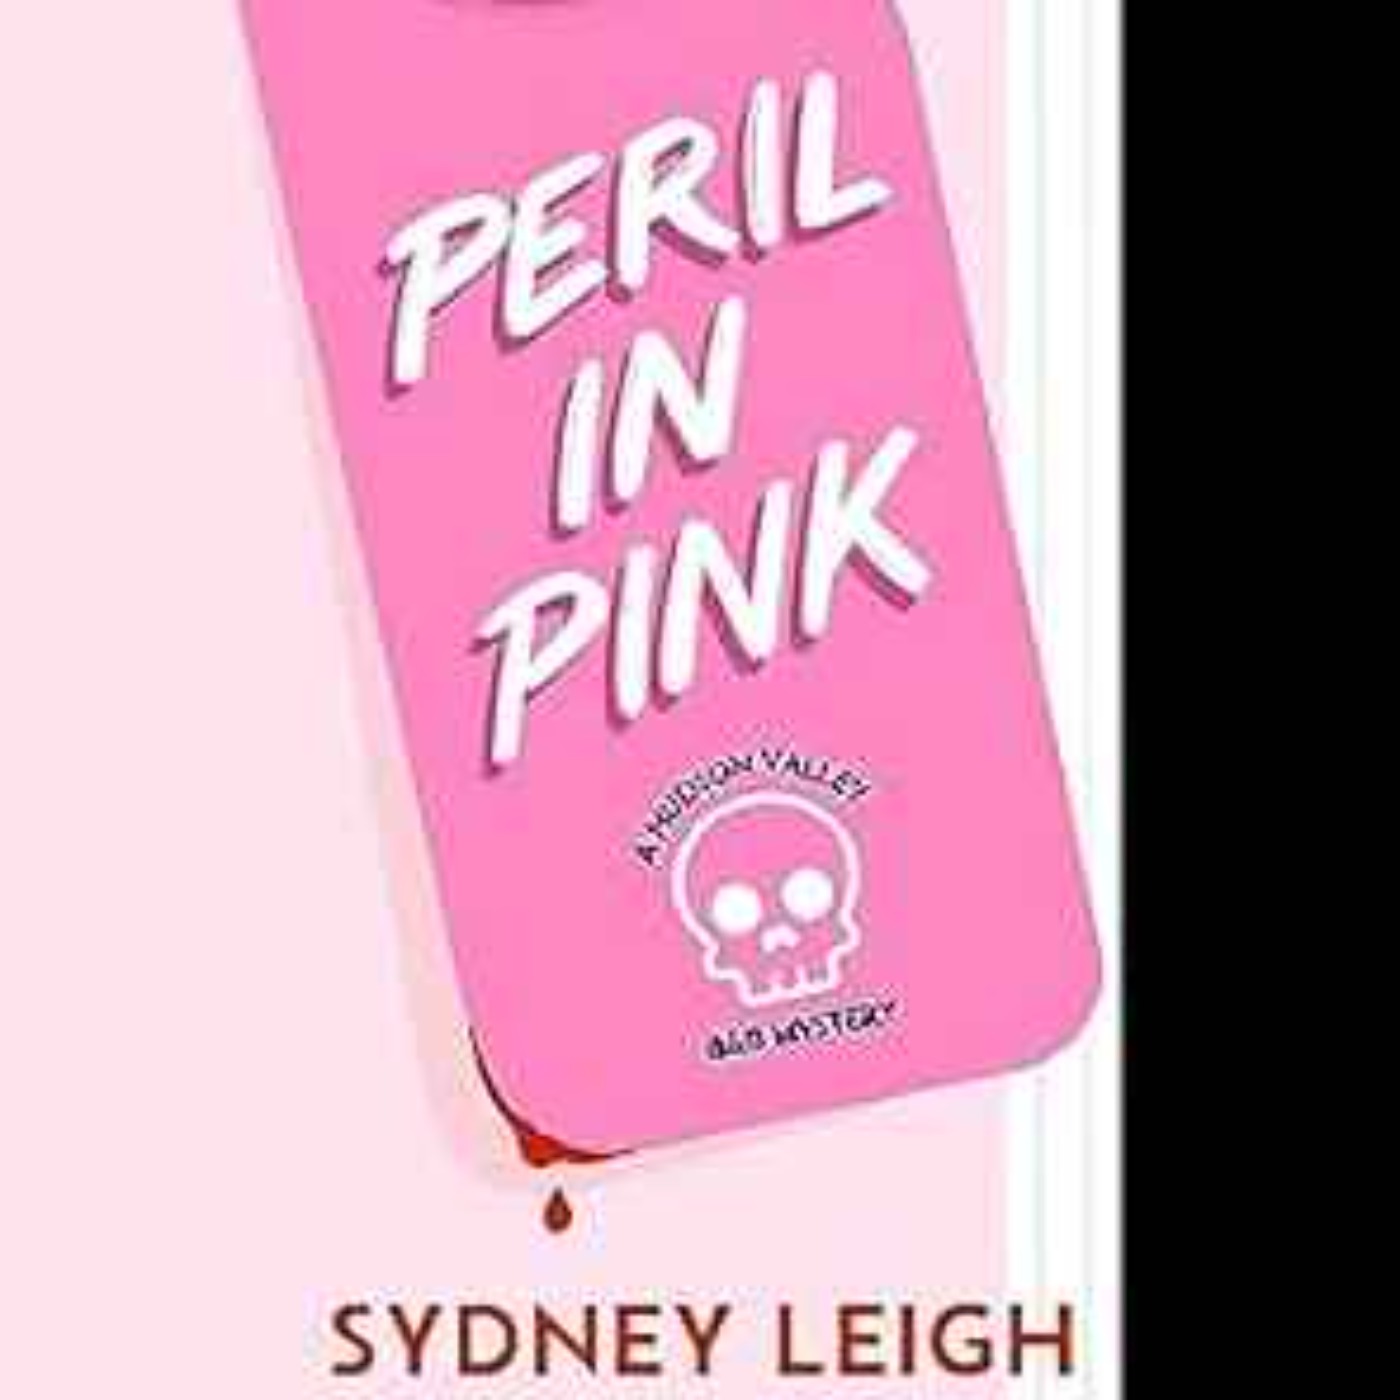 Sydney Leigh - Peril in Pink